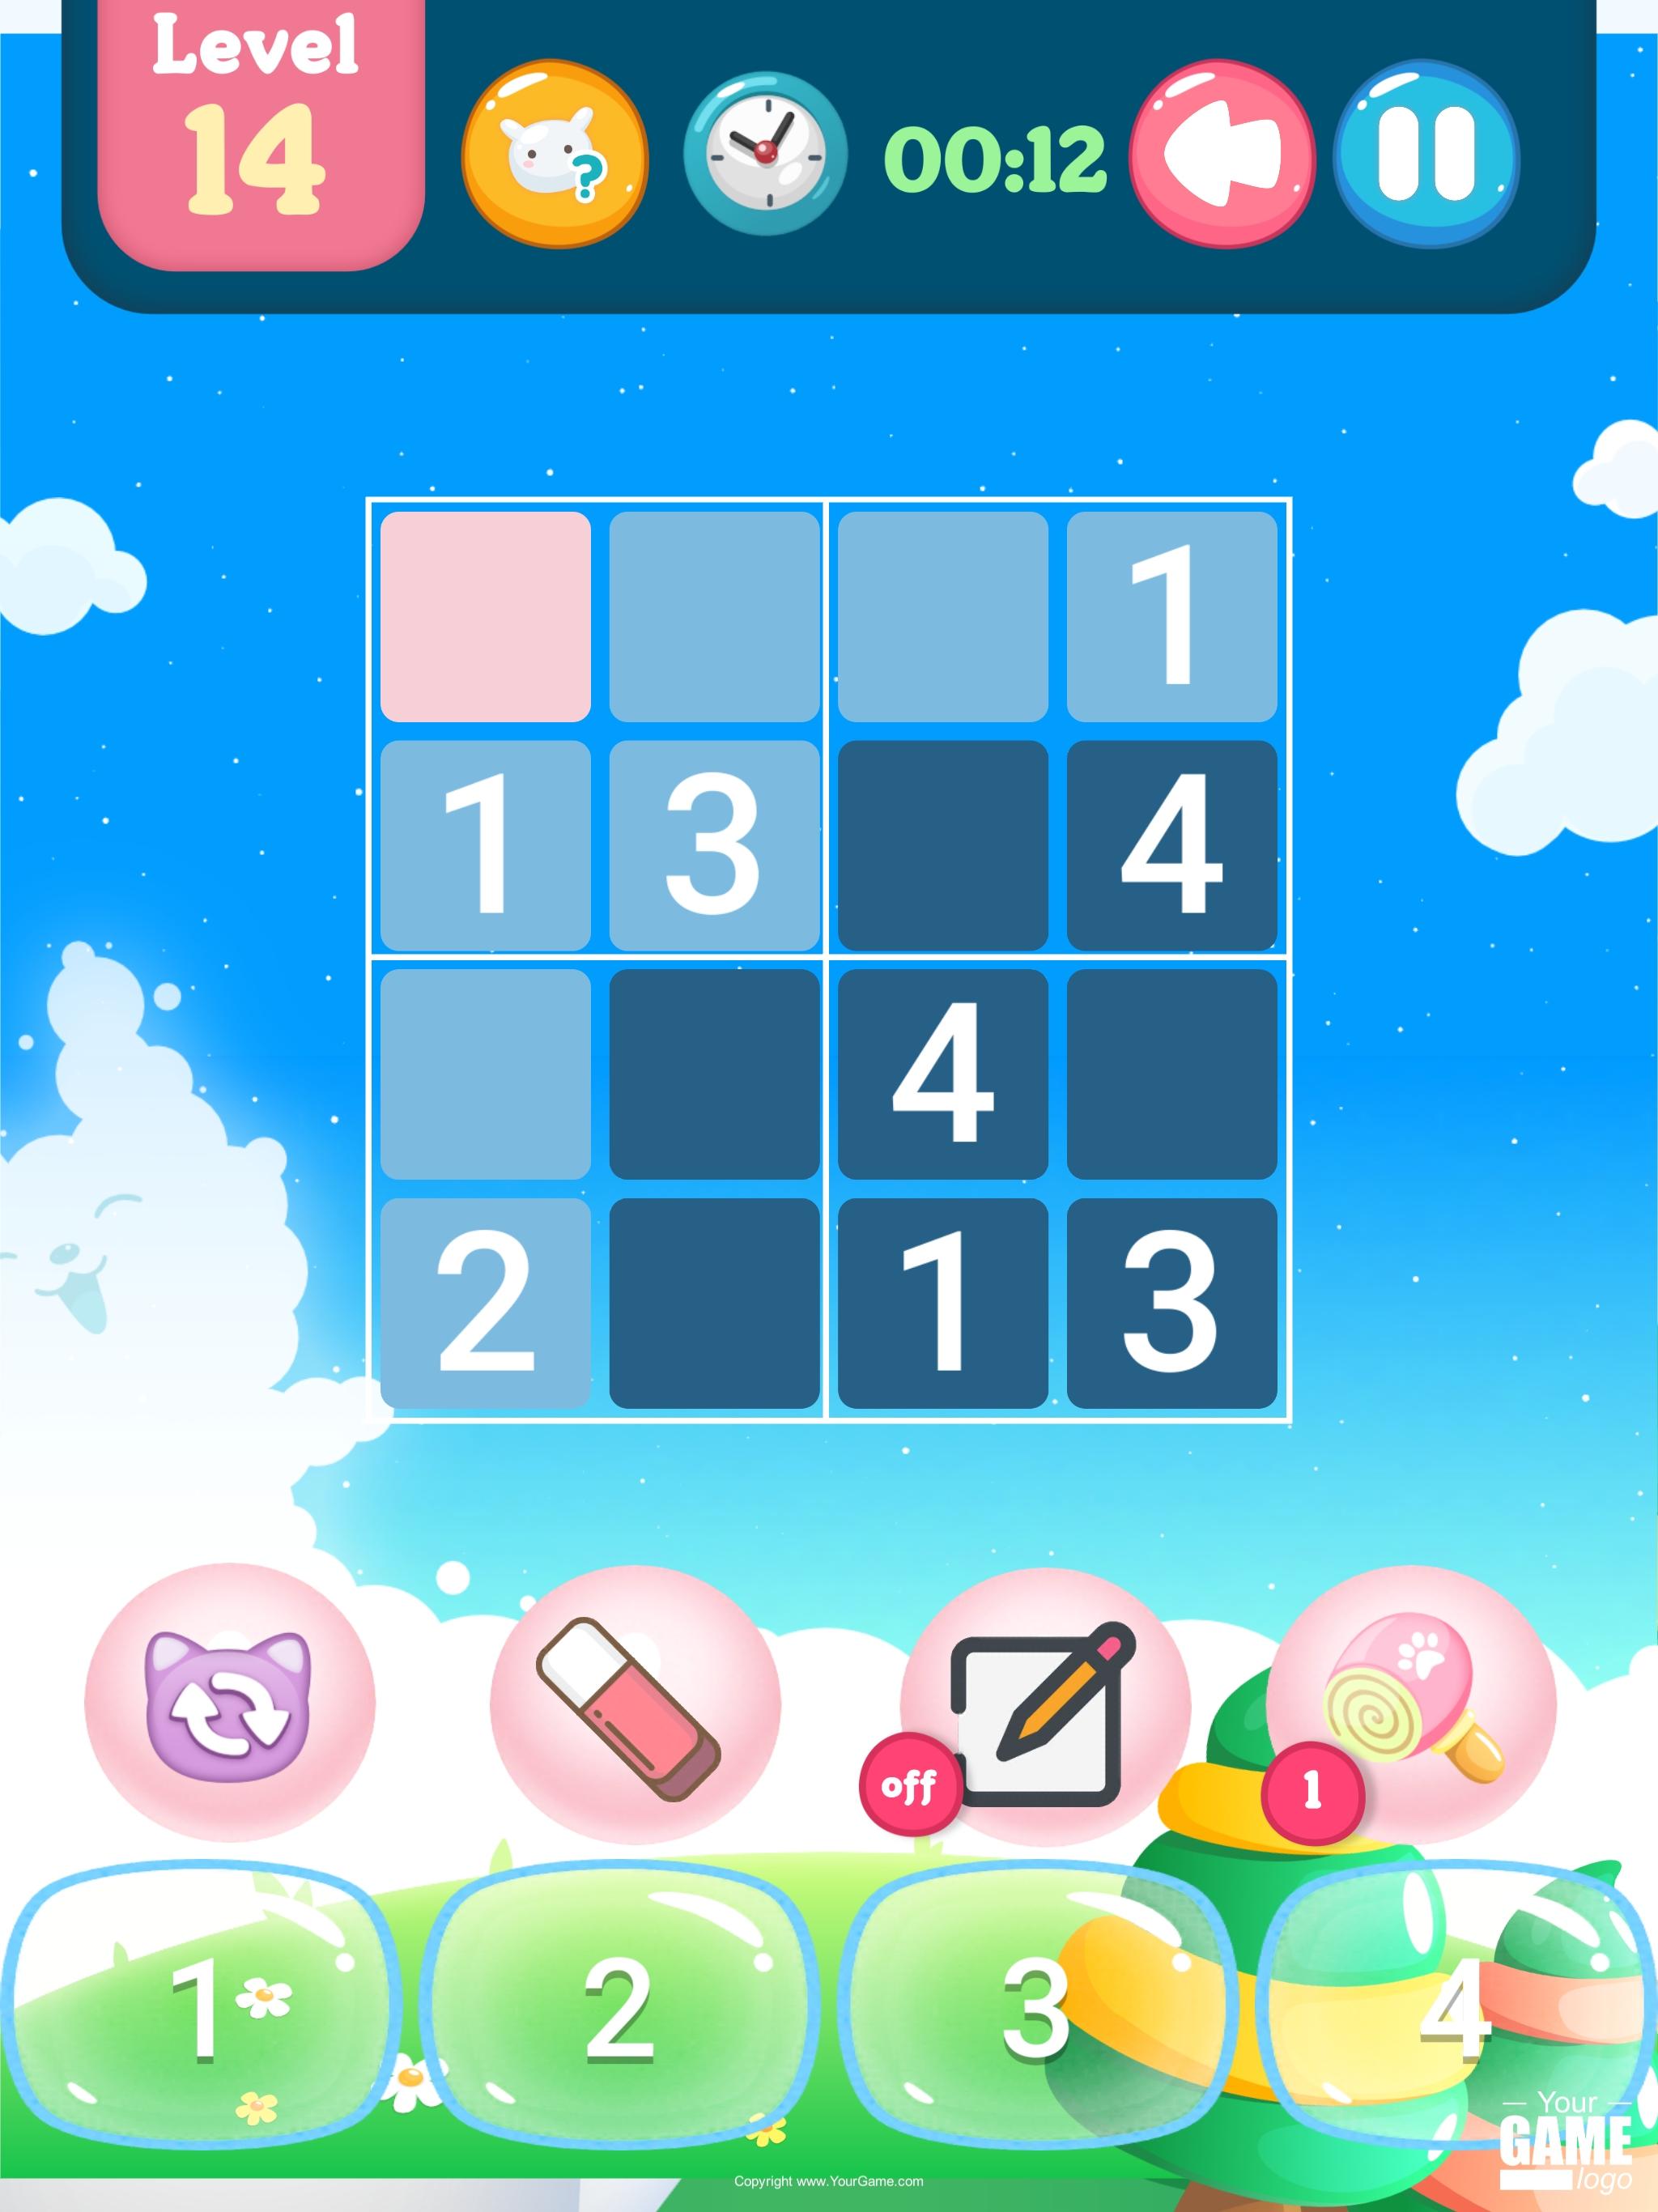 Kidoku – Kids Sudoku Puzzle for Android - APK Download